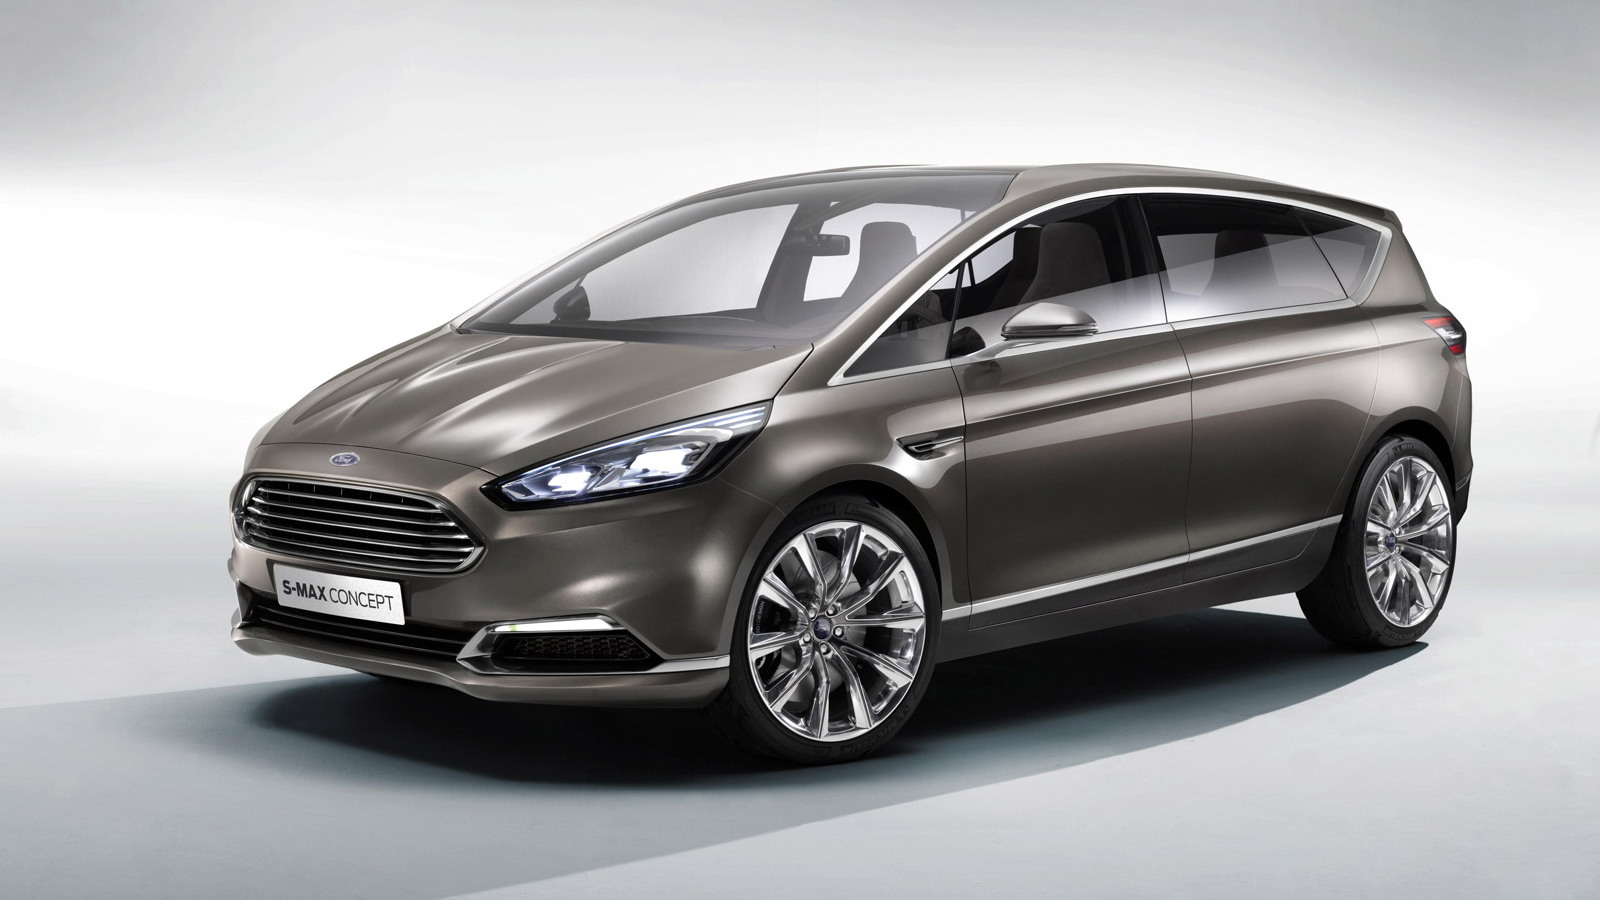 Ford Previews New Styling And Technology With S-Max Concept